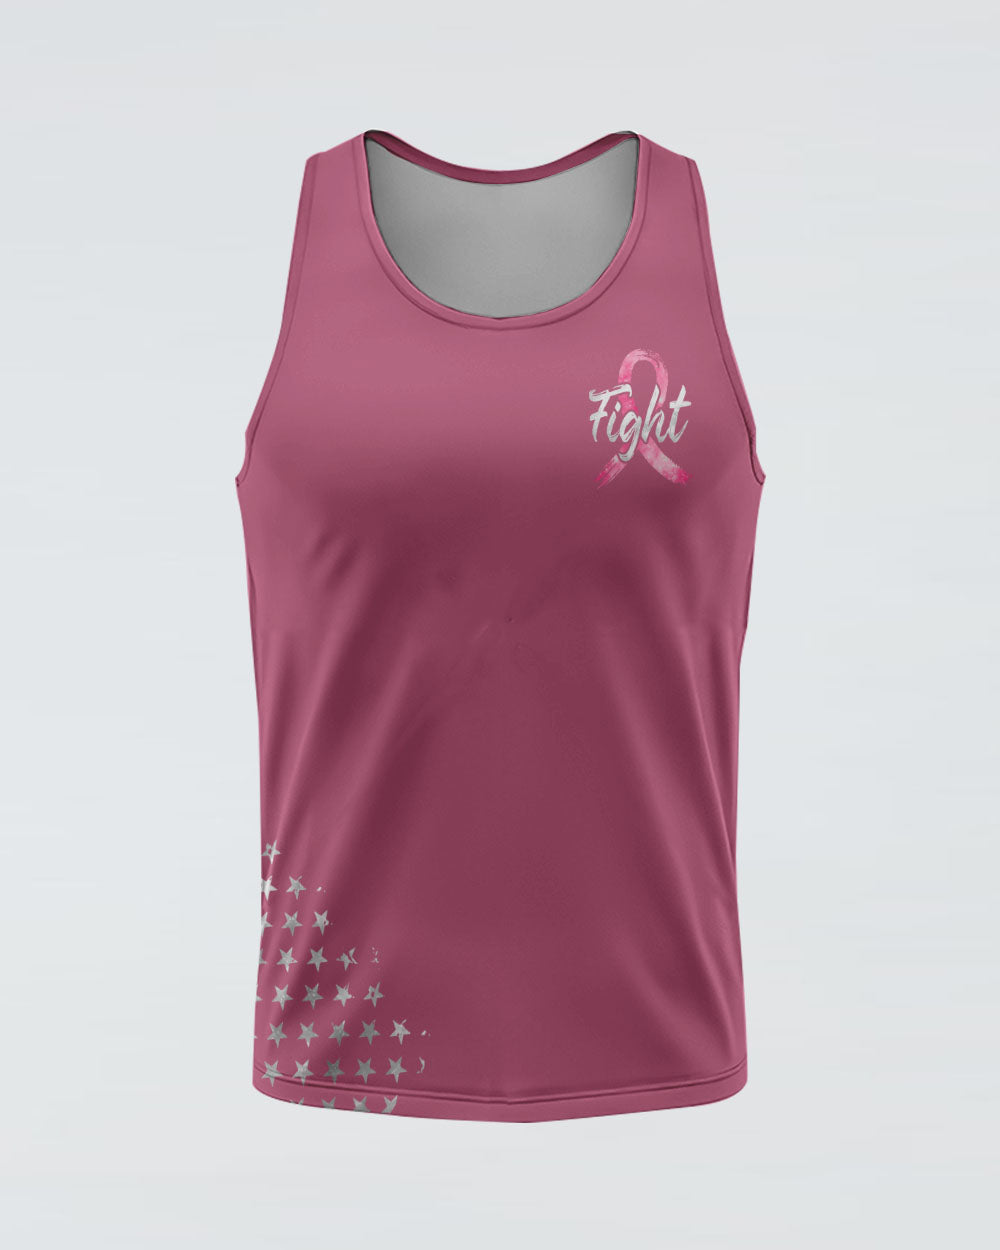 Fight Ribbon Silver Galaxy Flag Women's Breast Cancer Awareness Tanks